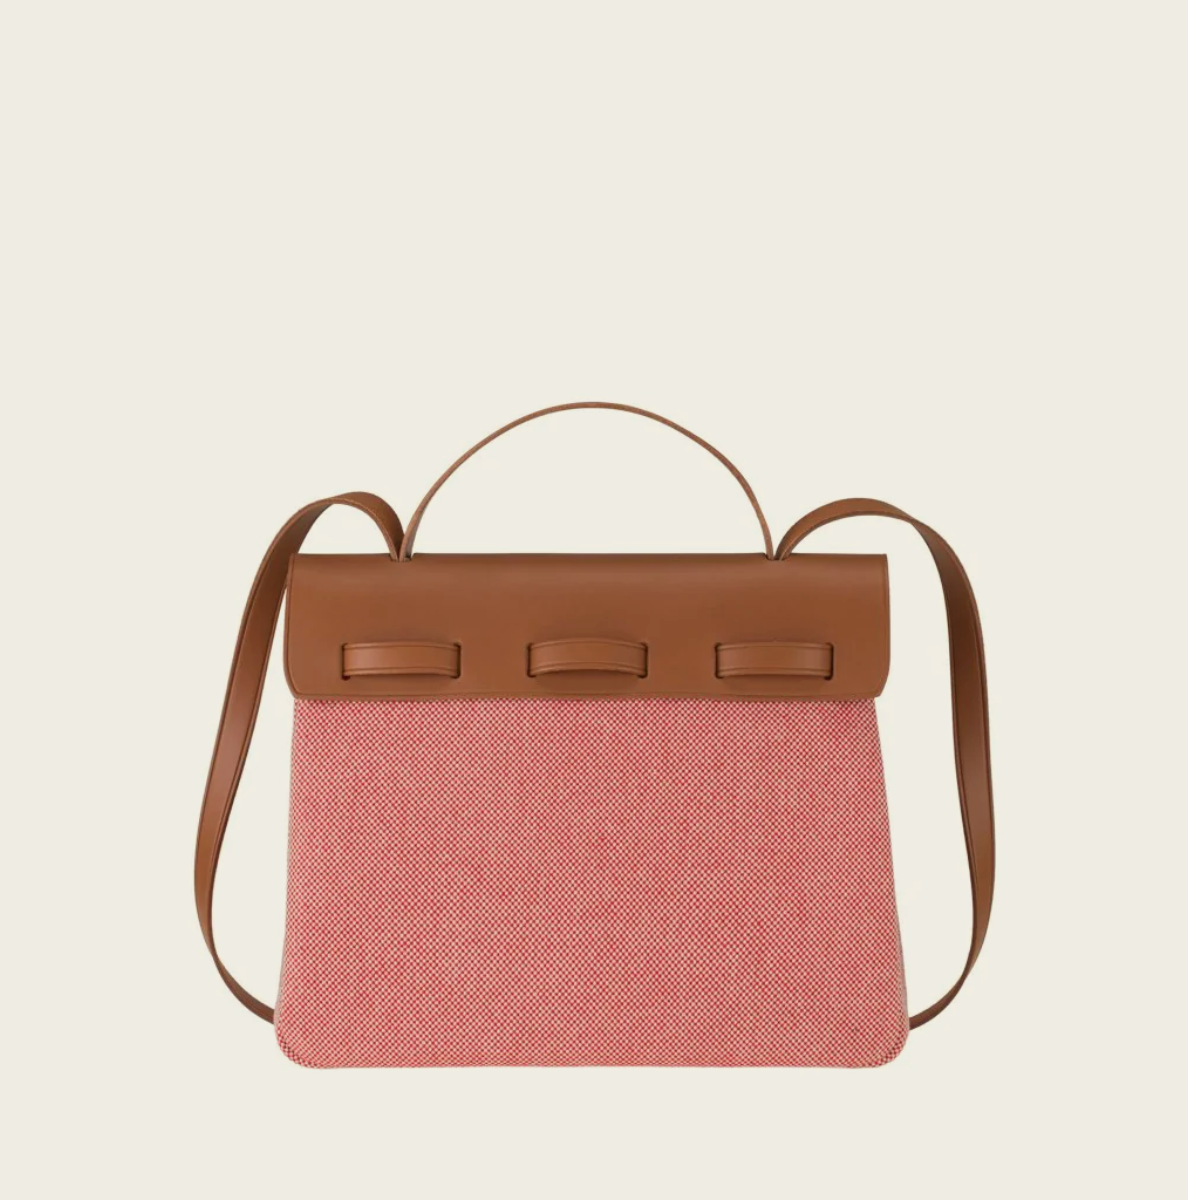 Handmade Luxury Bags from Italy